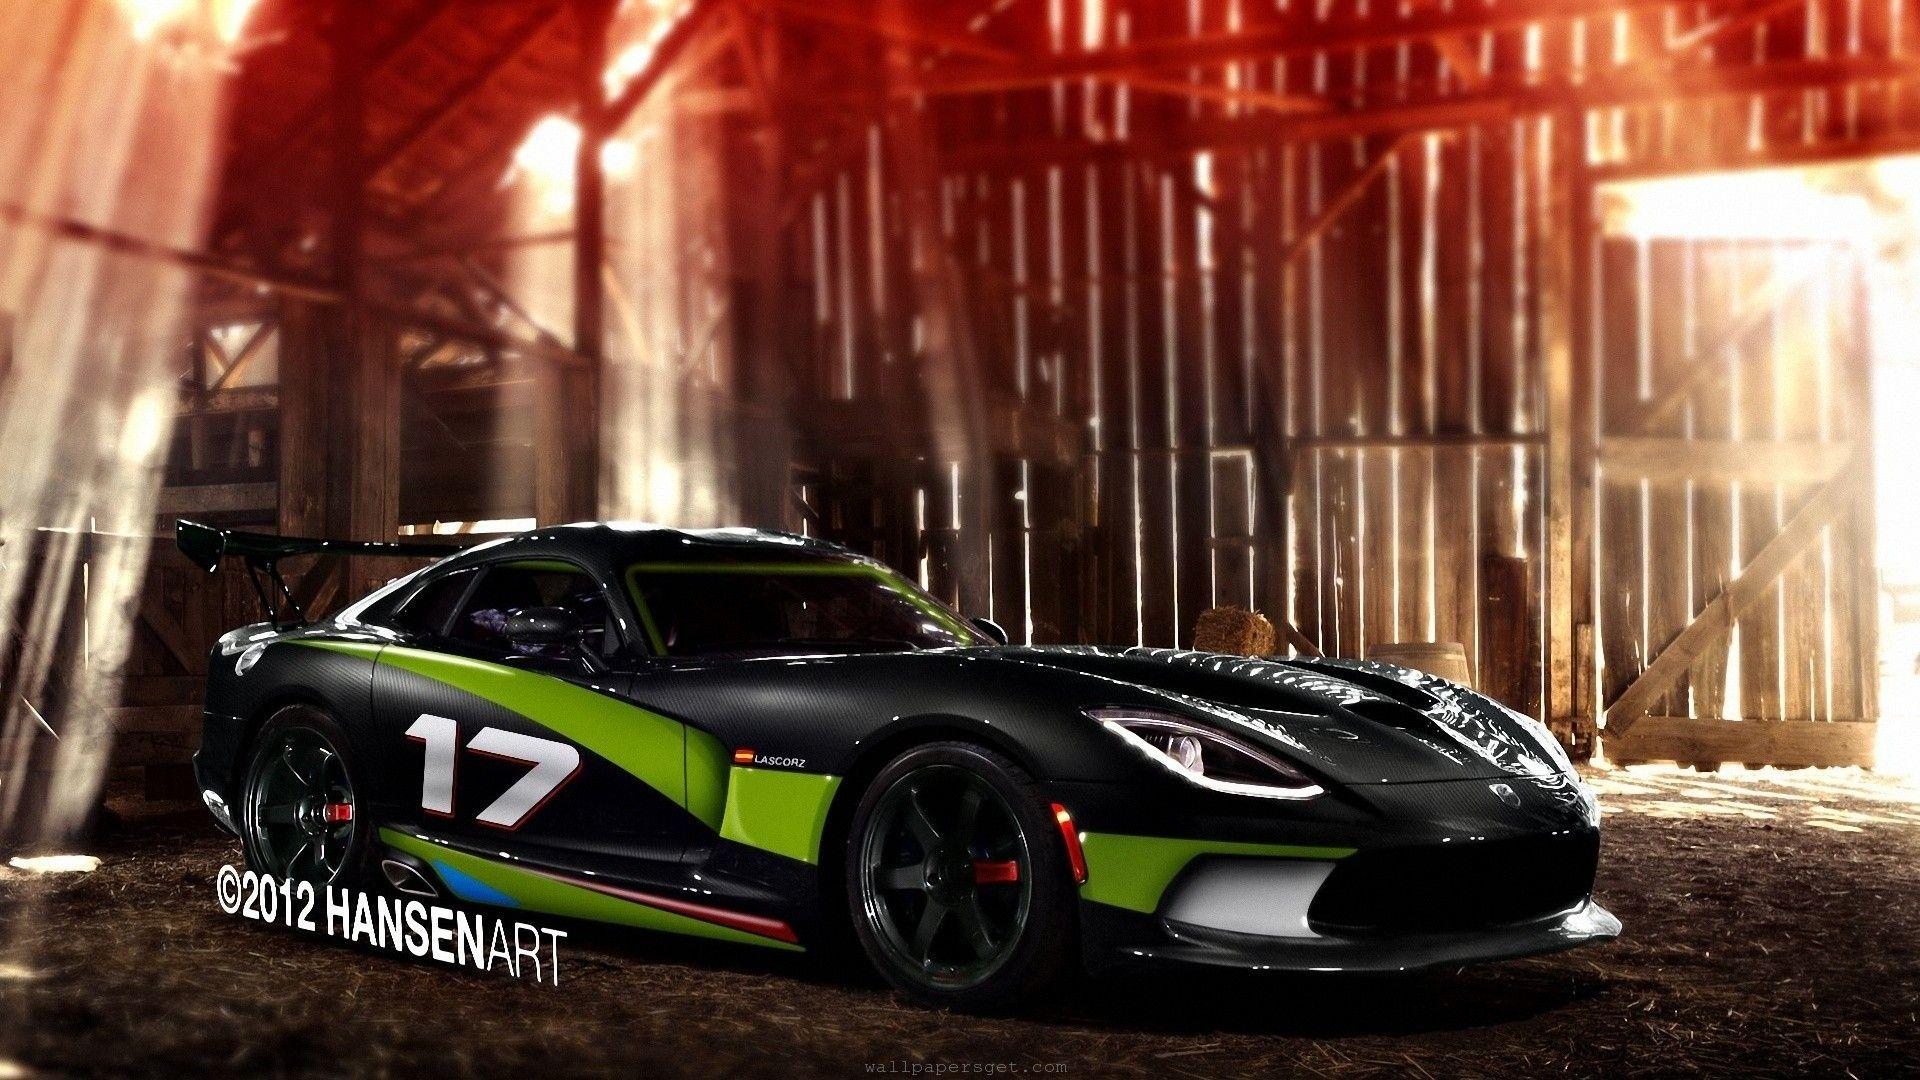 Download HD Wallpaper Of Modified Cars Viper Tuning Races Speed Mcle